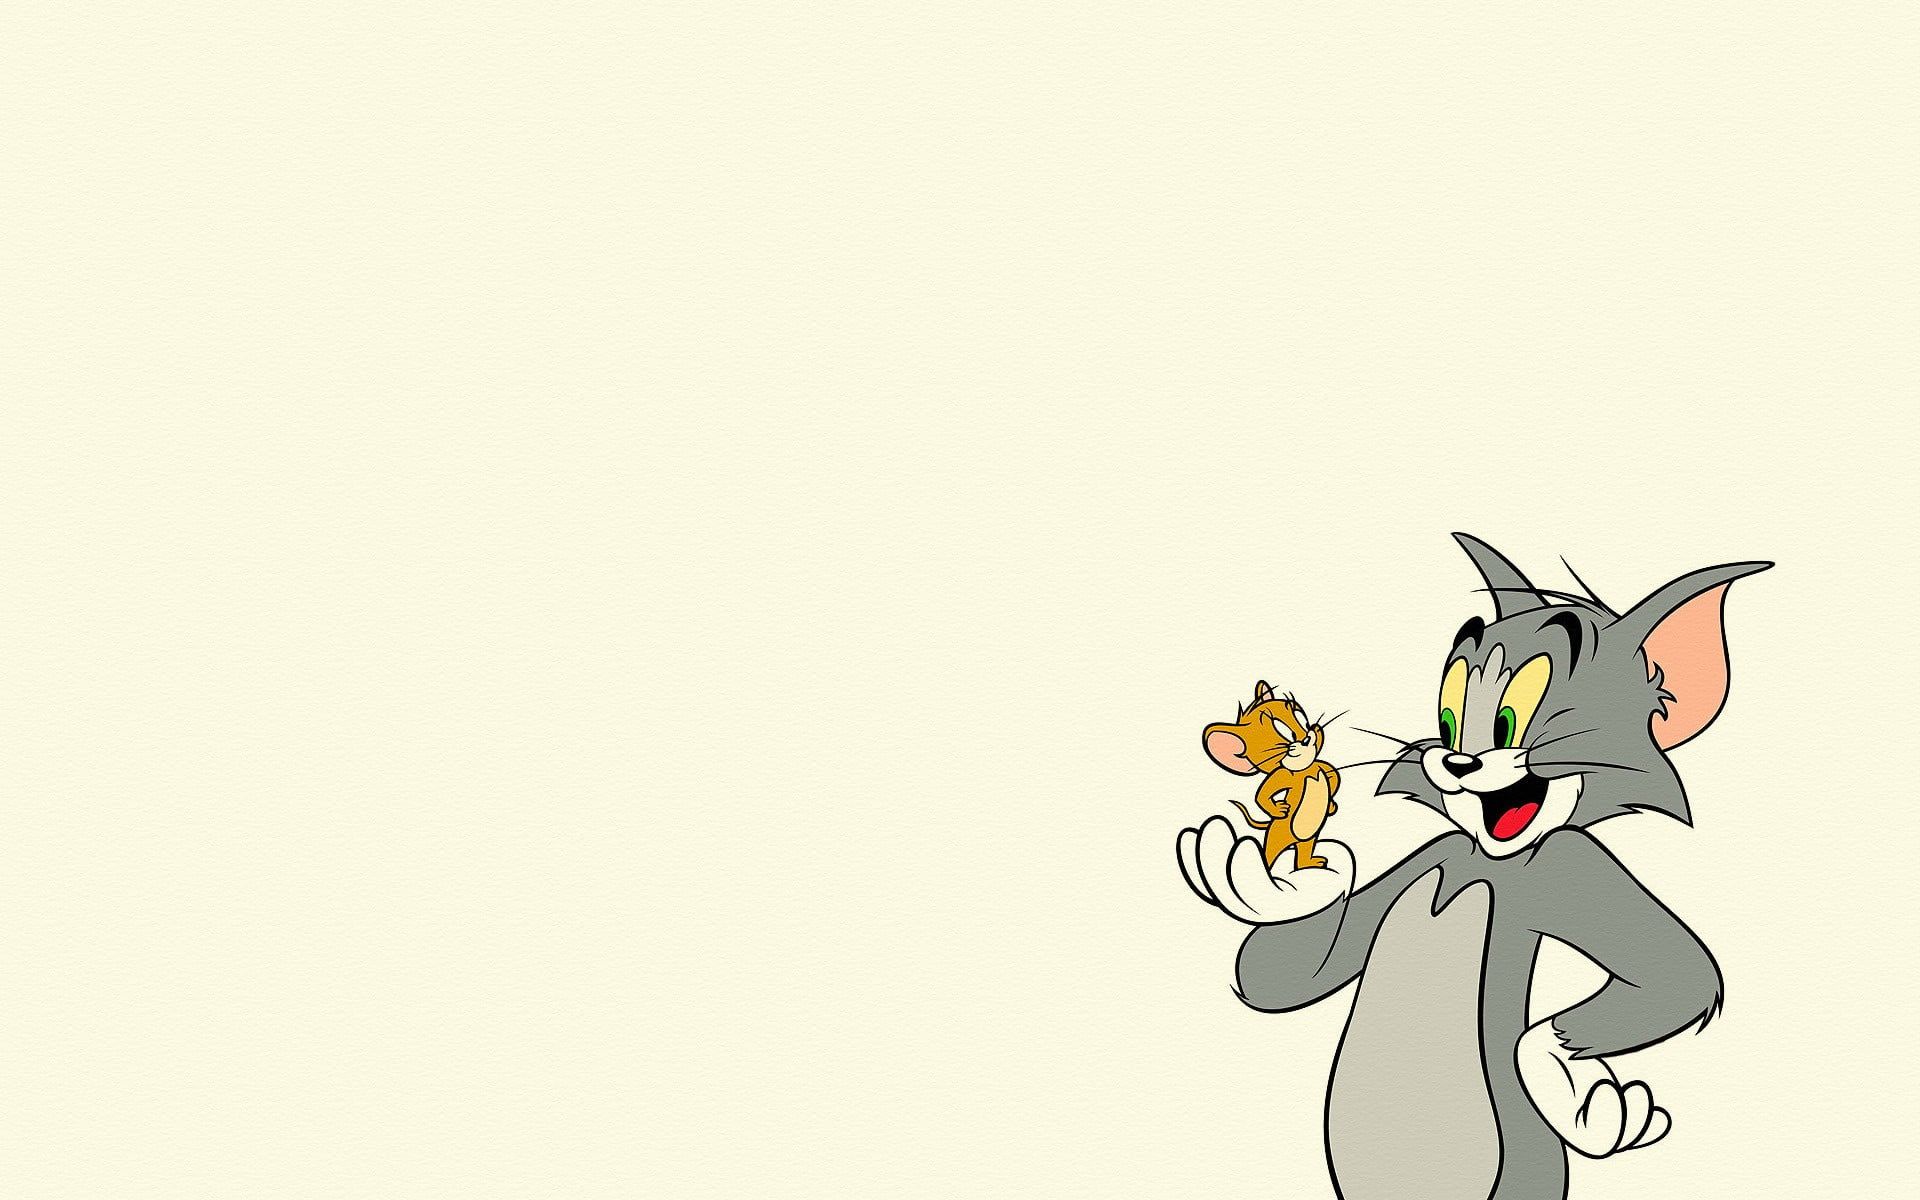 Tom & Jerry digital wallpaper Tom and Jerry #cartoon P #wallpaper #hdwallpaper #desktop. Tom and jerry wallpaper, Cartoon wallpaper, Cartoon wallpaper hd